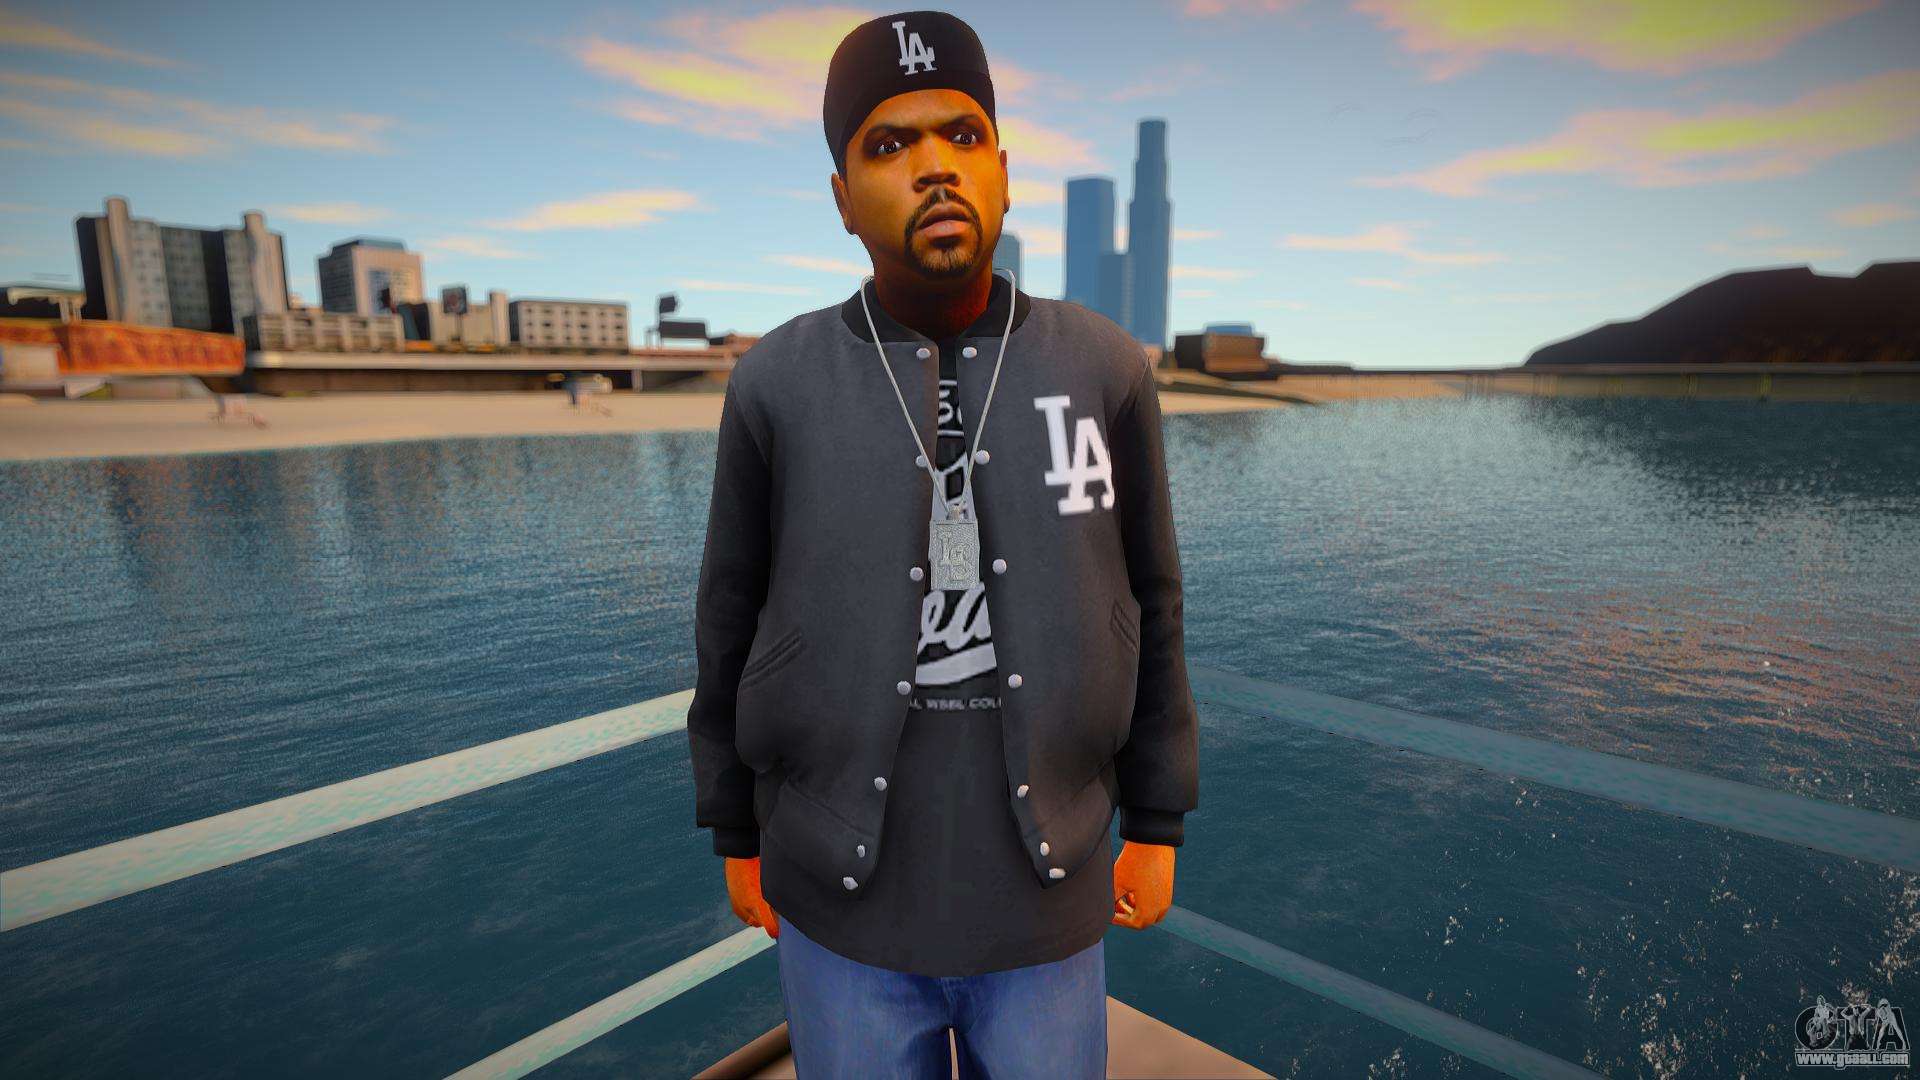 New Ice Cube for GTA San Andreas